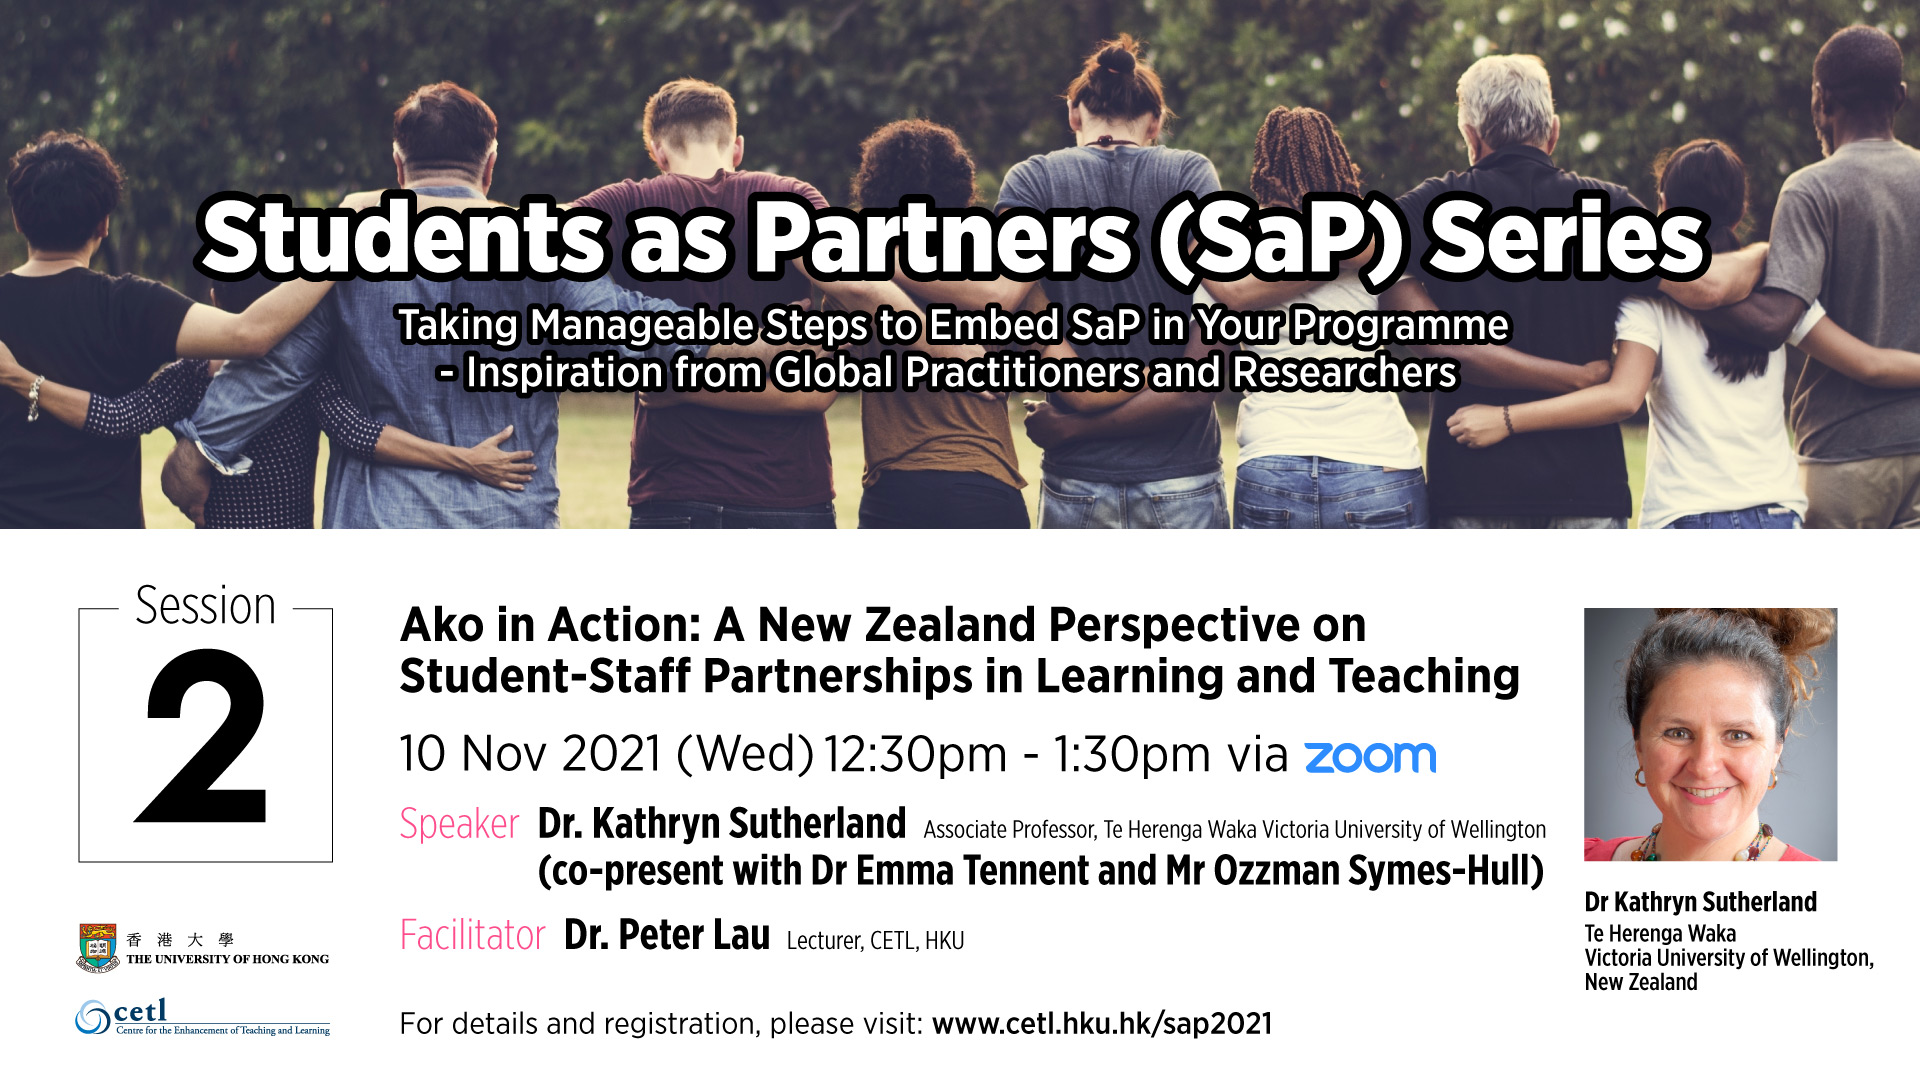 Session 2: Ako in Action: A New Zealand Perspective on Student-Staff Partnerships in Learning and Teaching